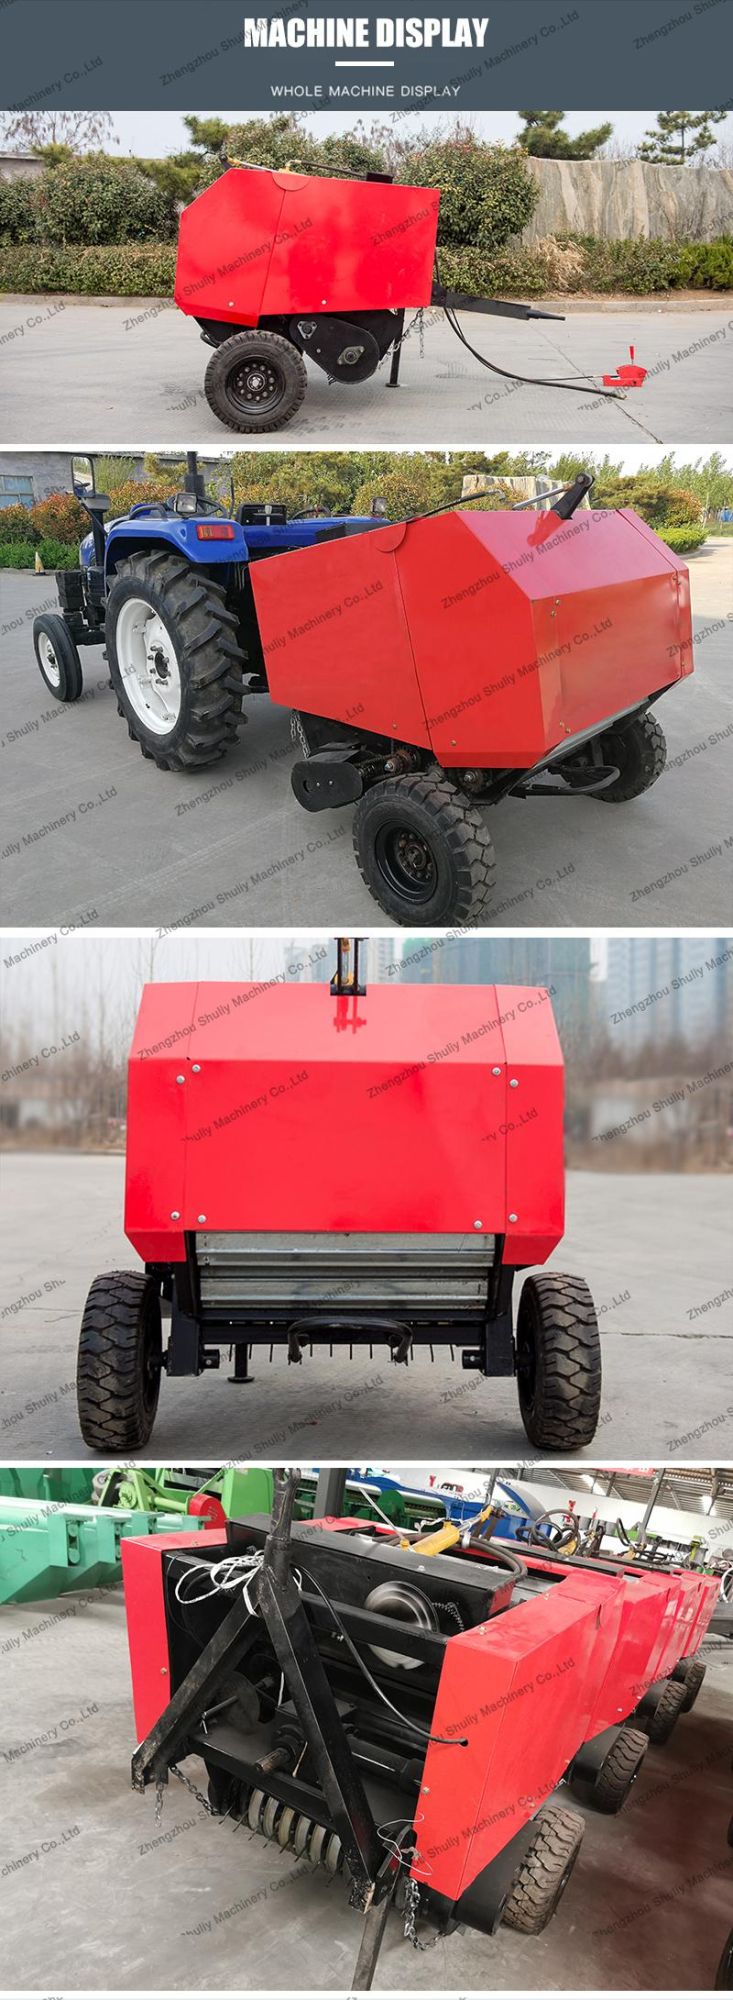 Cheap Hay Baler Hay and Straw Baler Round Baler for Tractor